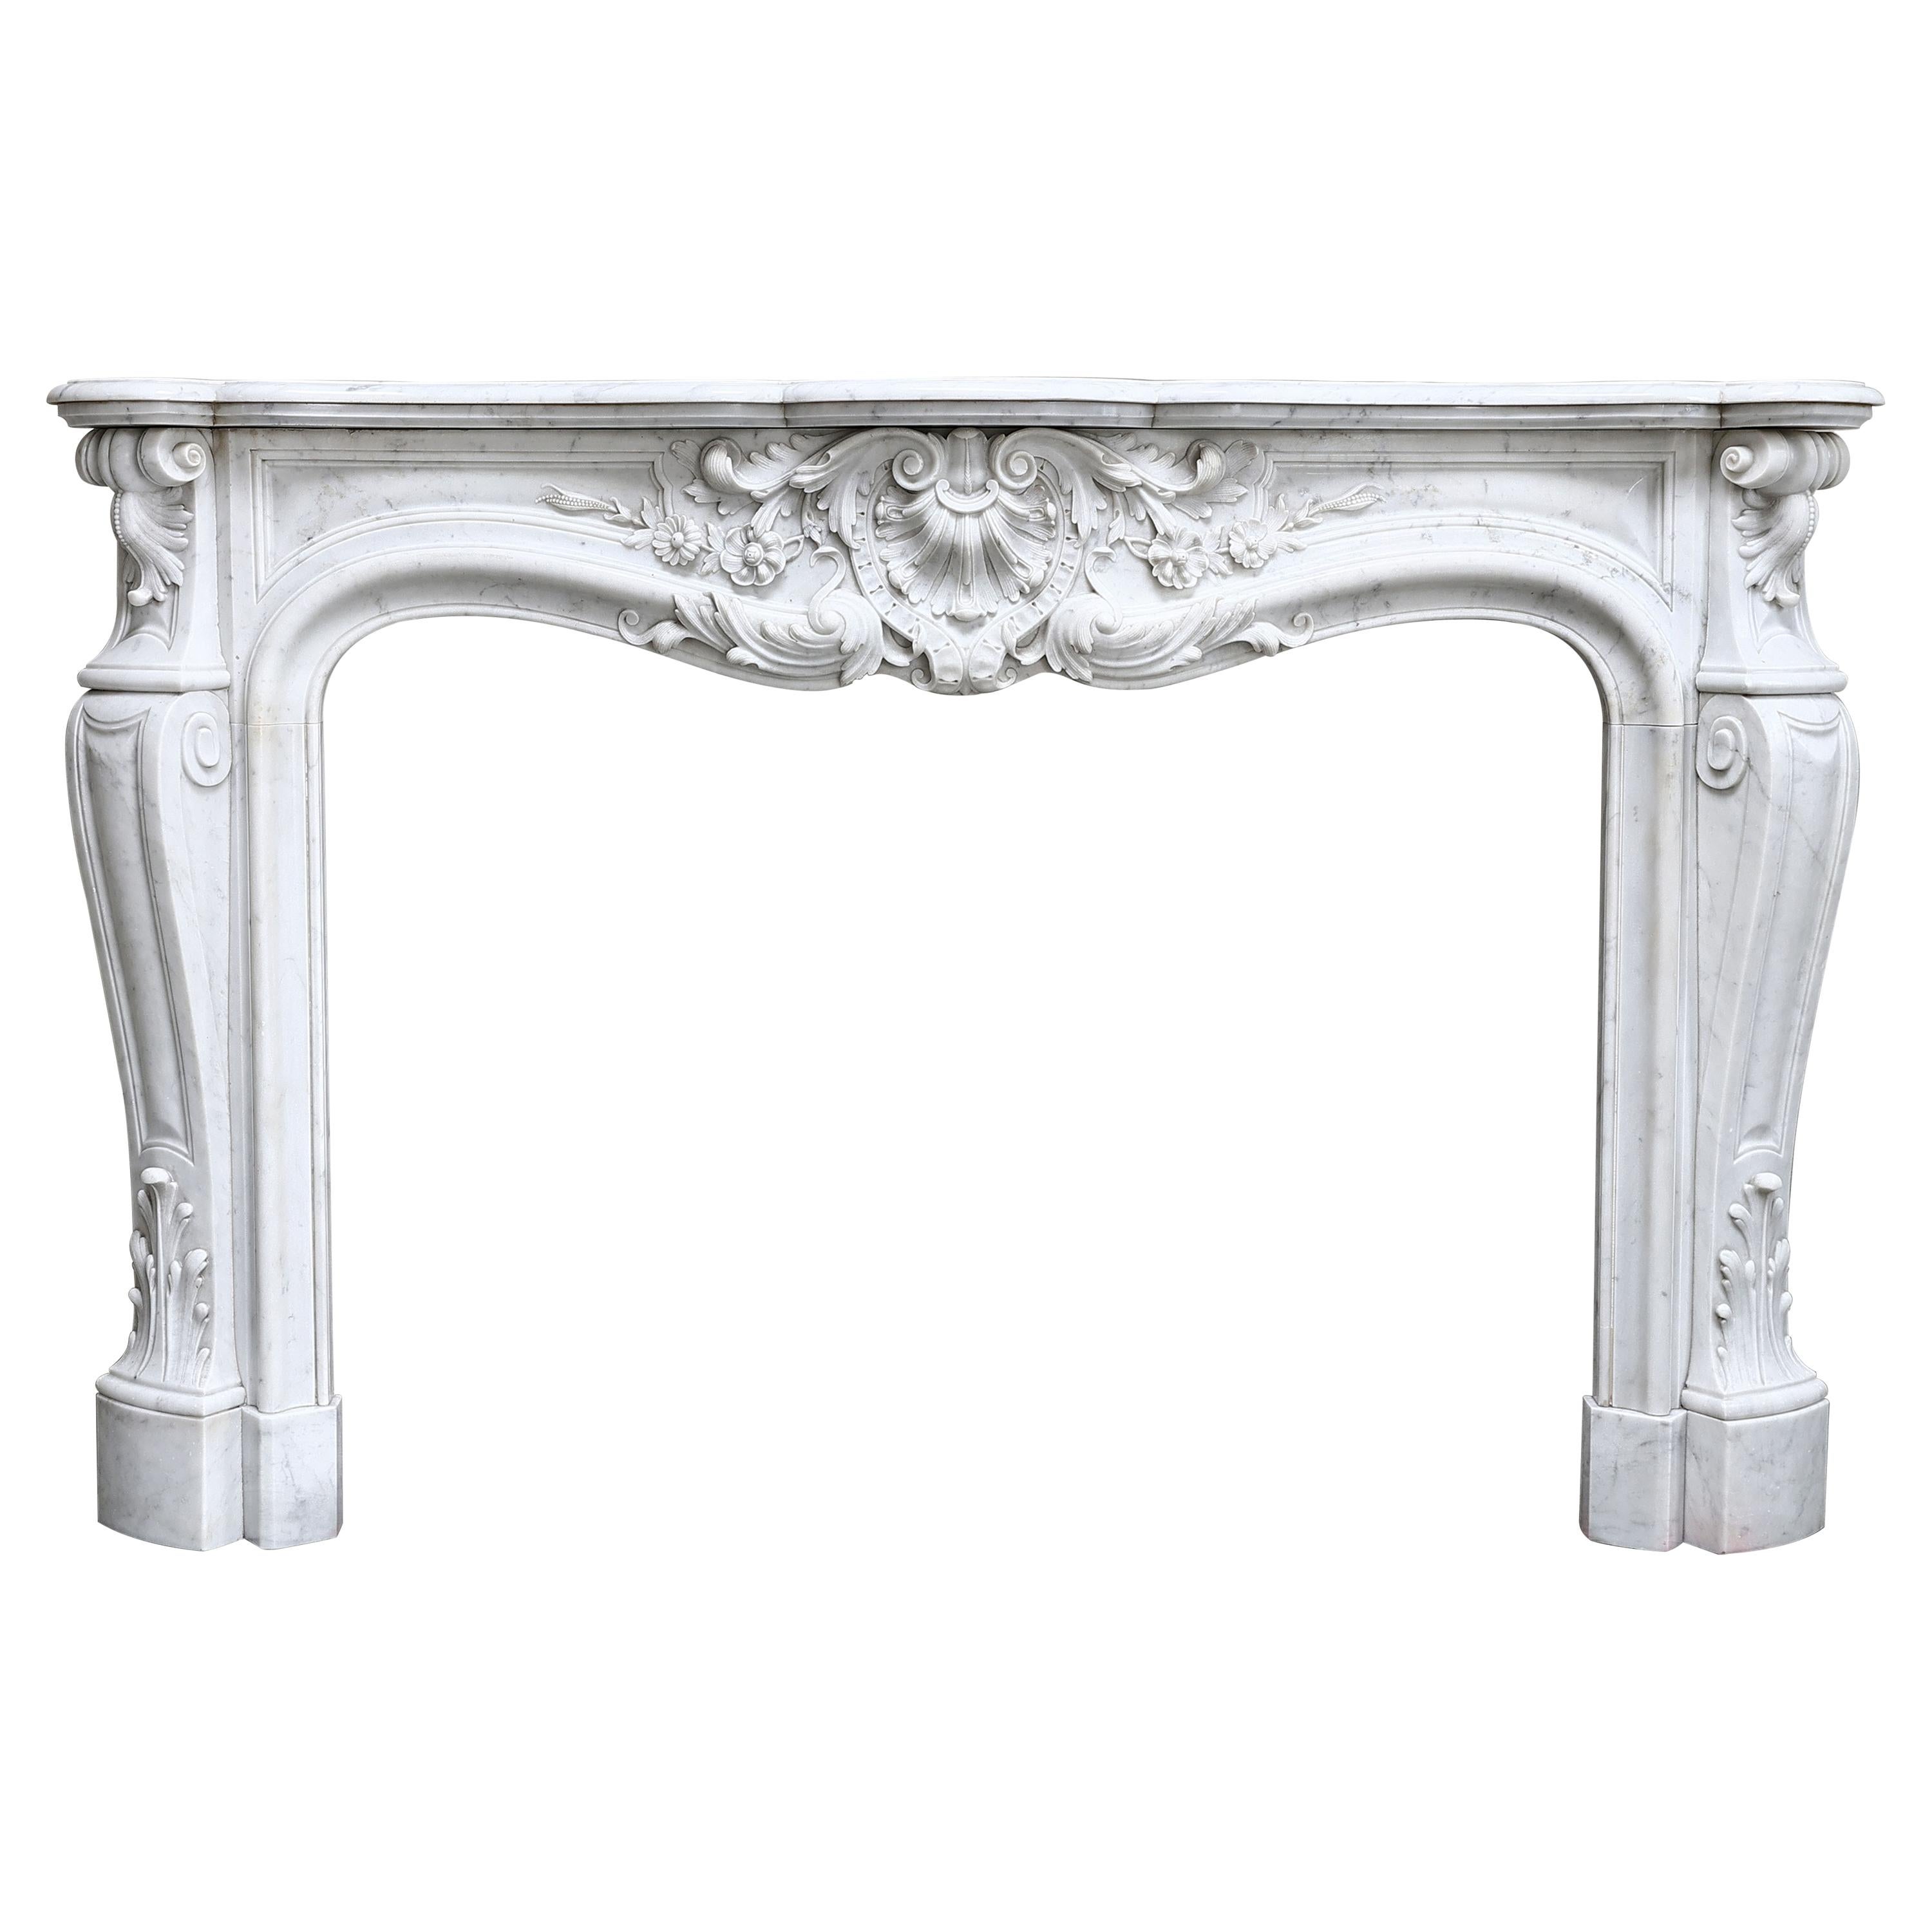 Antique Marble Fireplace  Carrara Marble  19th Century  Monumental